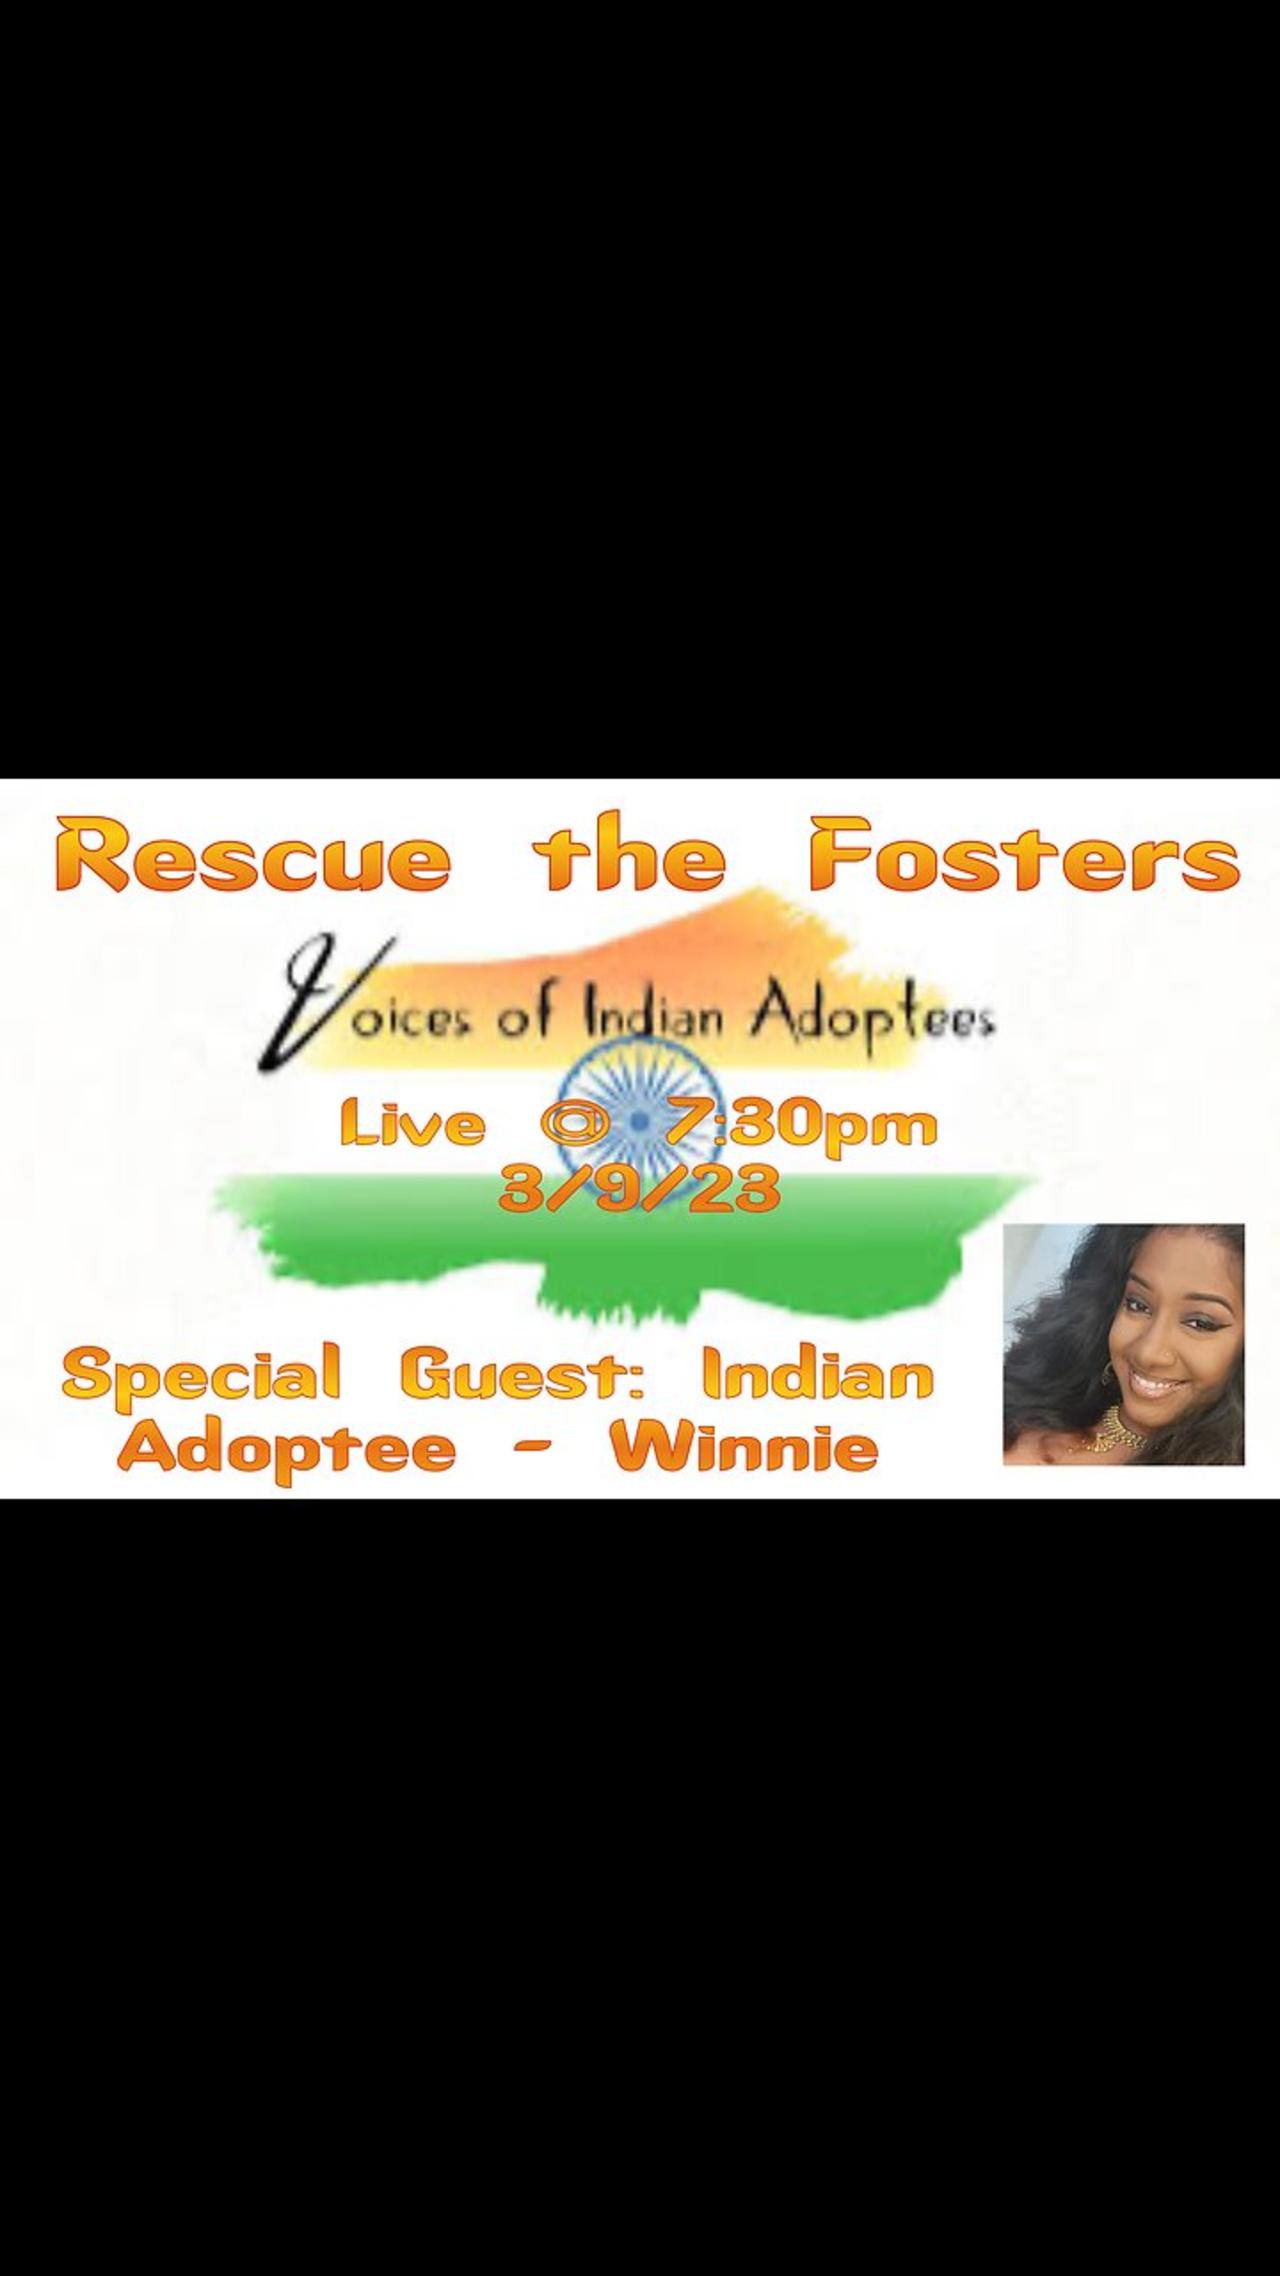 Rescue the Fosters w/ Special Guest: Founder of Voices of Indian Adoptees - Winnie